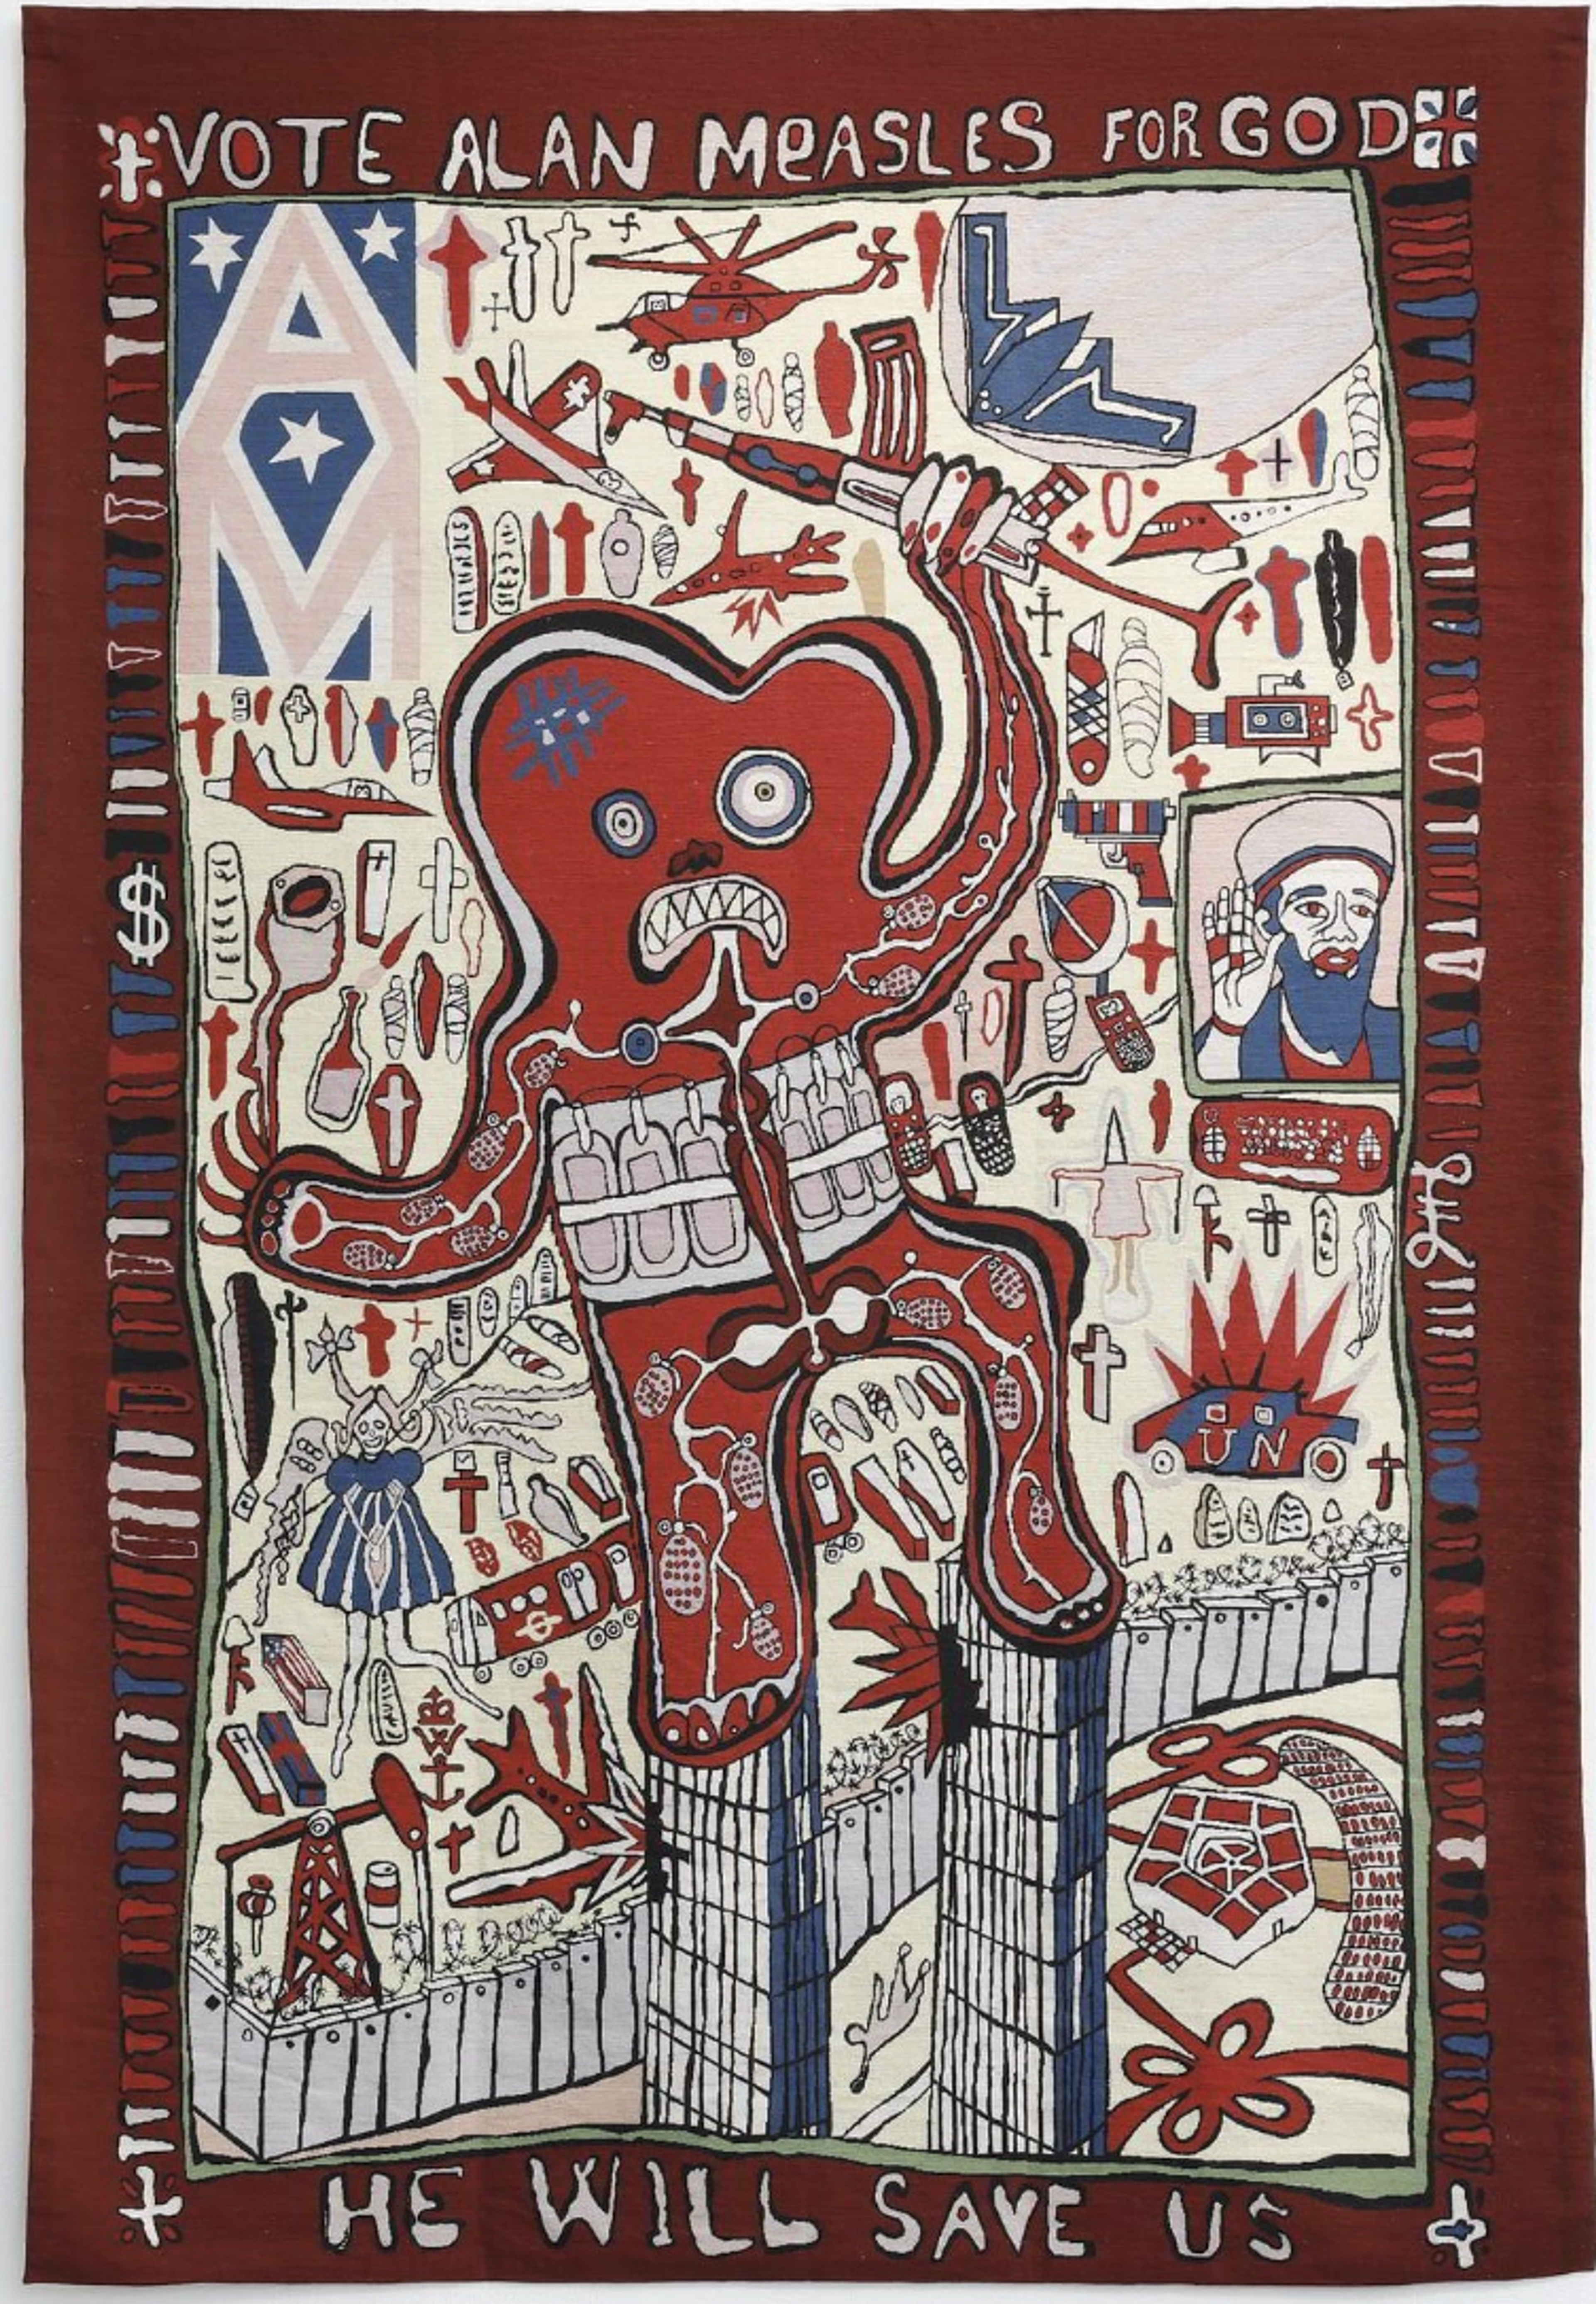 Wool needlepoint tapestry by Grayson Perry, featuring his teddy bear, Alan Measles, in red at the centre of the piece. He is surrounded by religious and politically-related imagery, such as crosses and the Twin Towers. The brown perimeter of the tapestry is adorned with text, including the slogan 'VOTE ALAN MEASLES FOR GOD'.